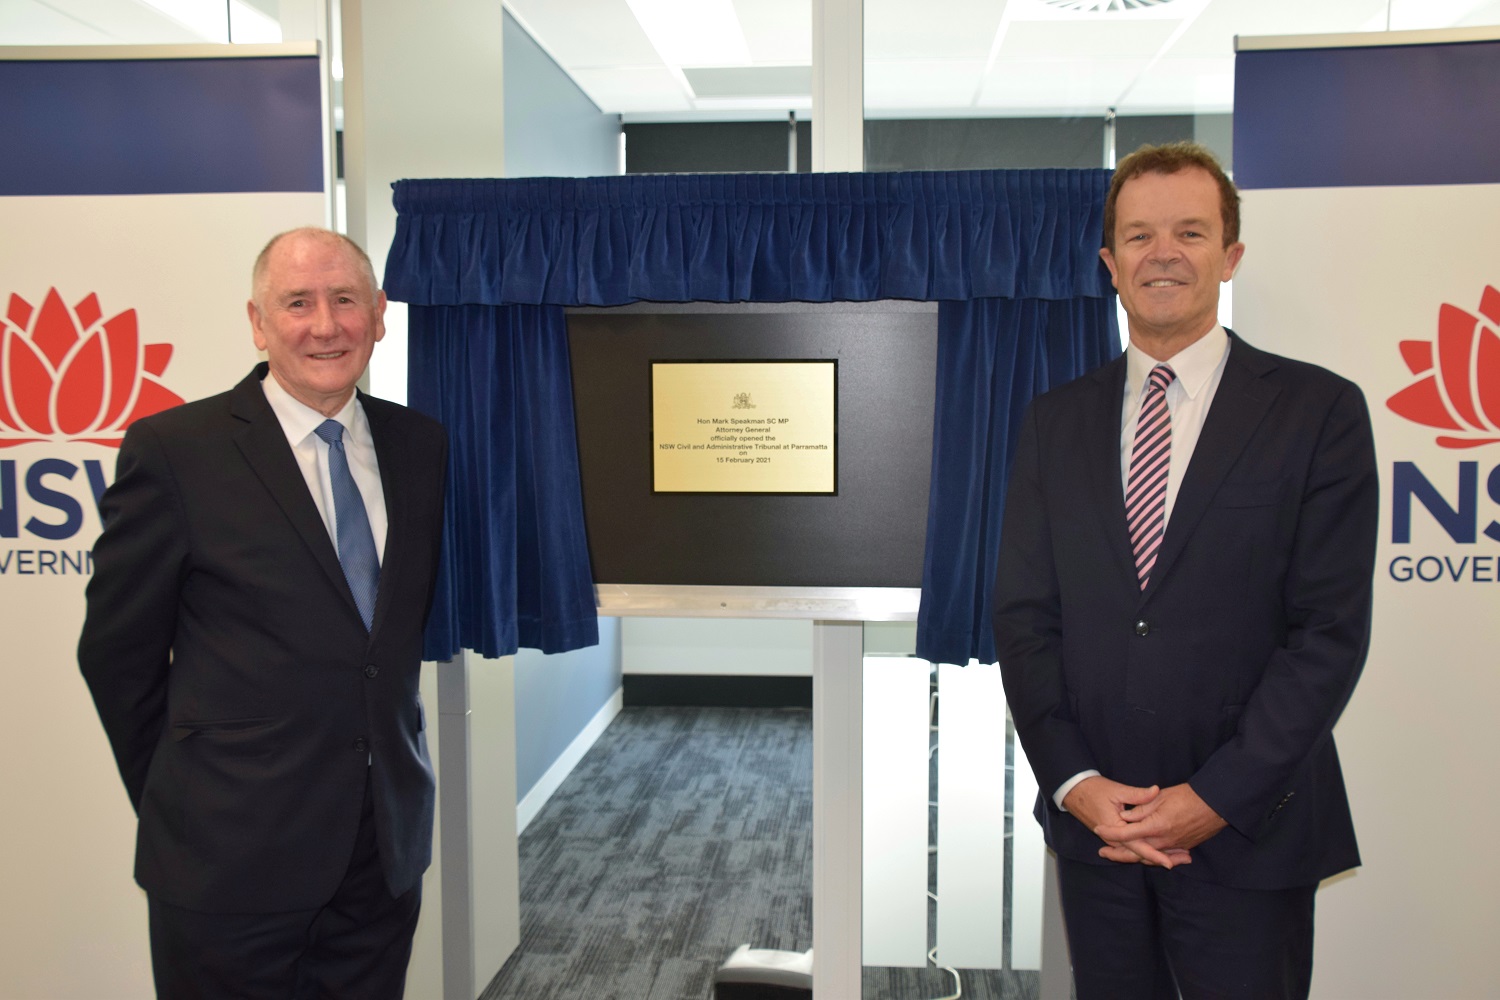  City of Parramatta Lord Mayor Cr Bob Dwyer and NSW Attorney-General Mark Speakman at the opening of the new NSW Civil and Administrative Tribunal registry in Parramatta.